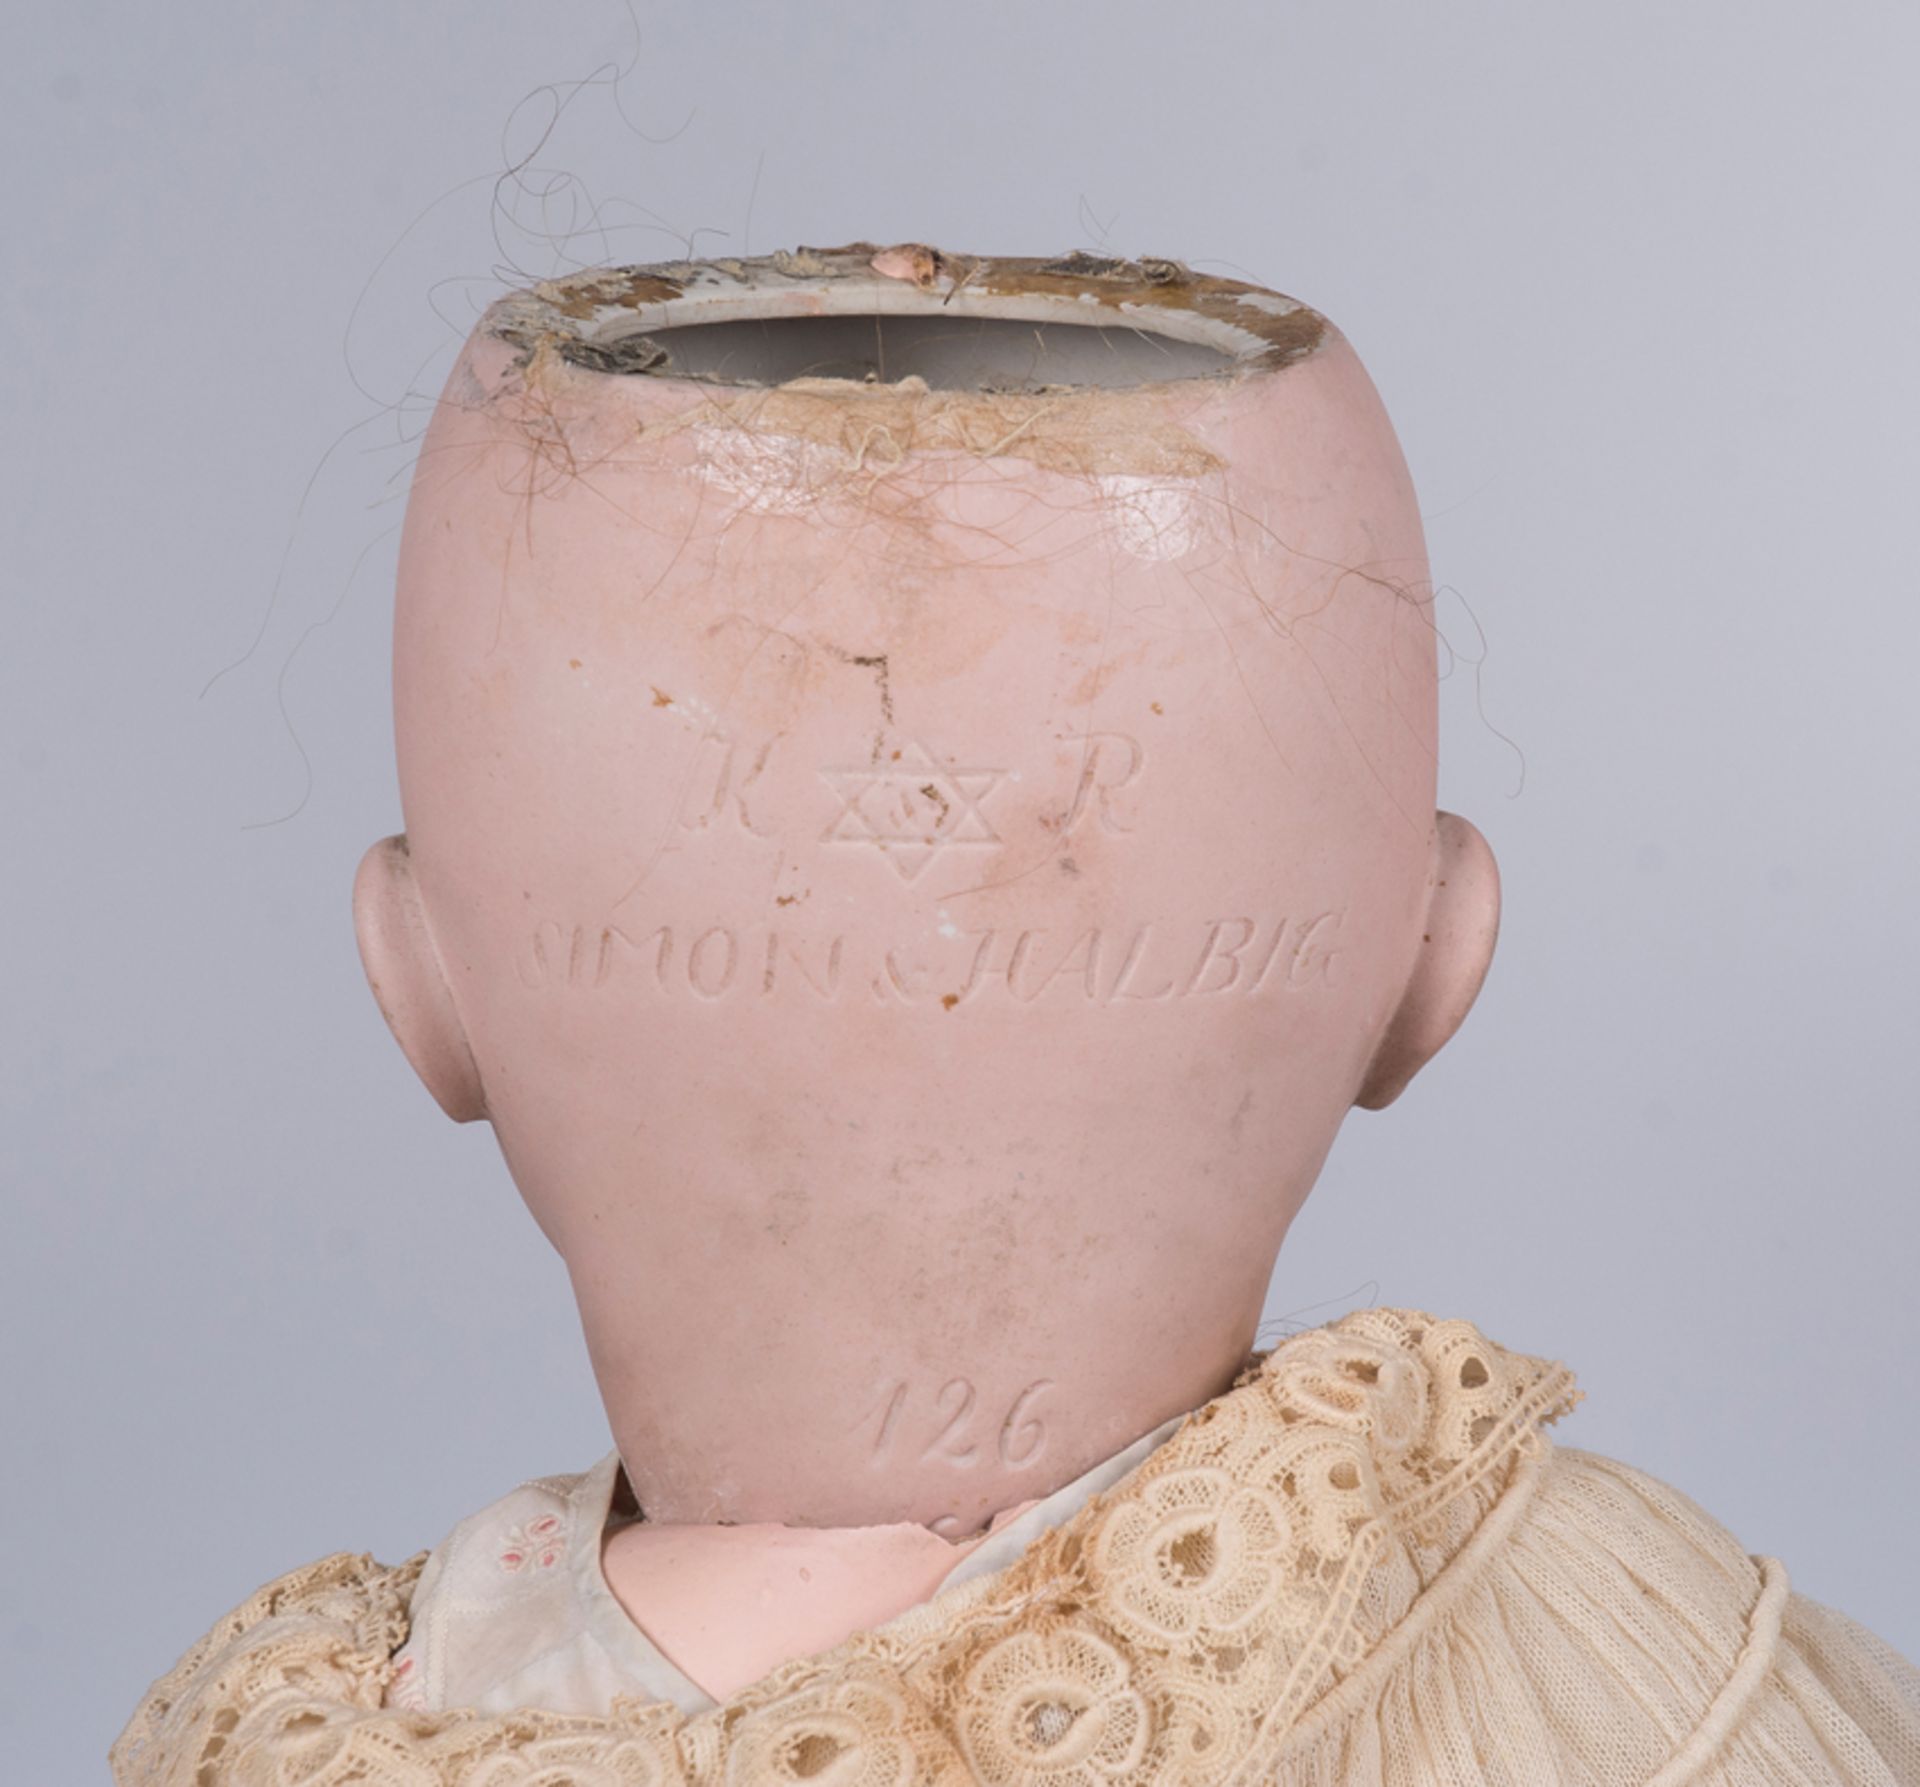 Jointed baby doll. Kammer & Reinhart. Germany. Circa 1900. - Image 3 of 3